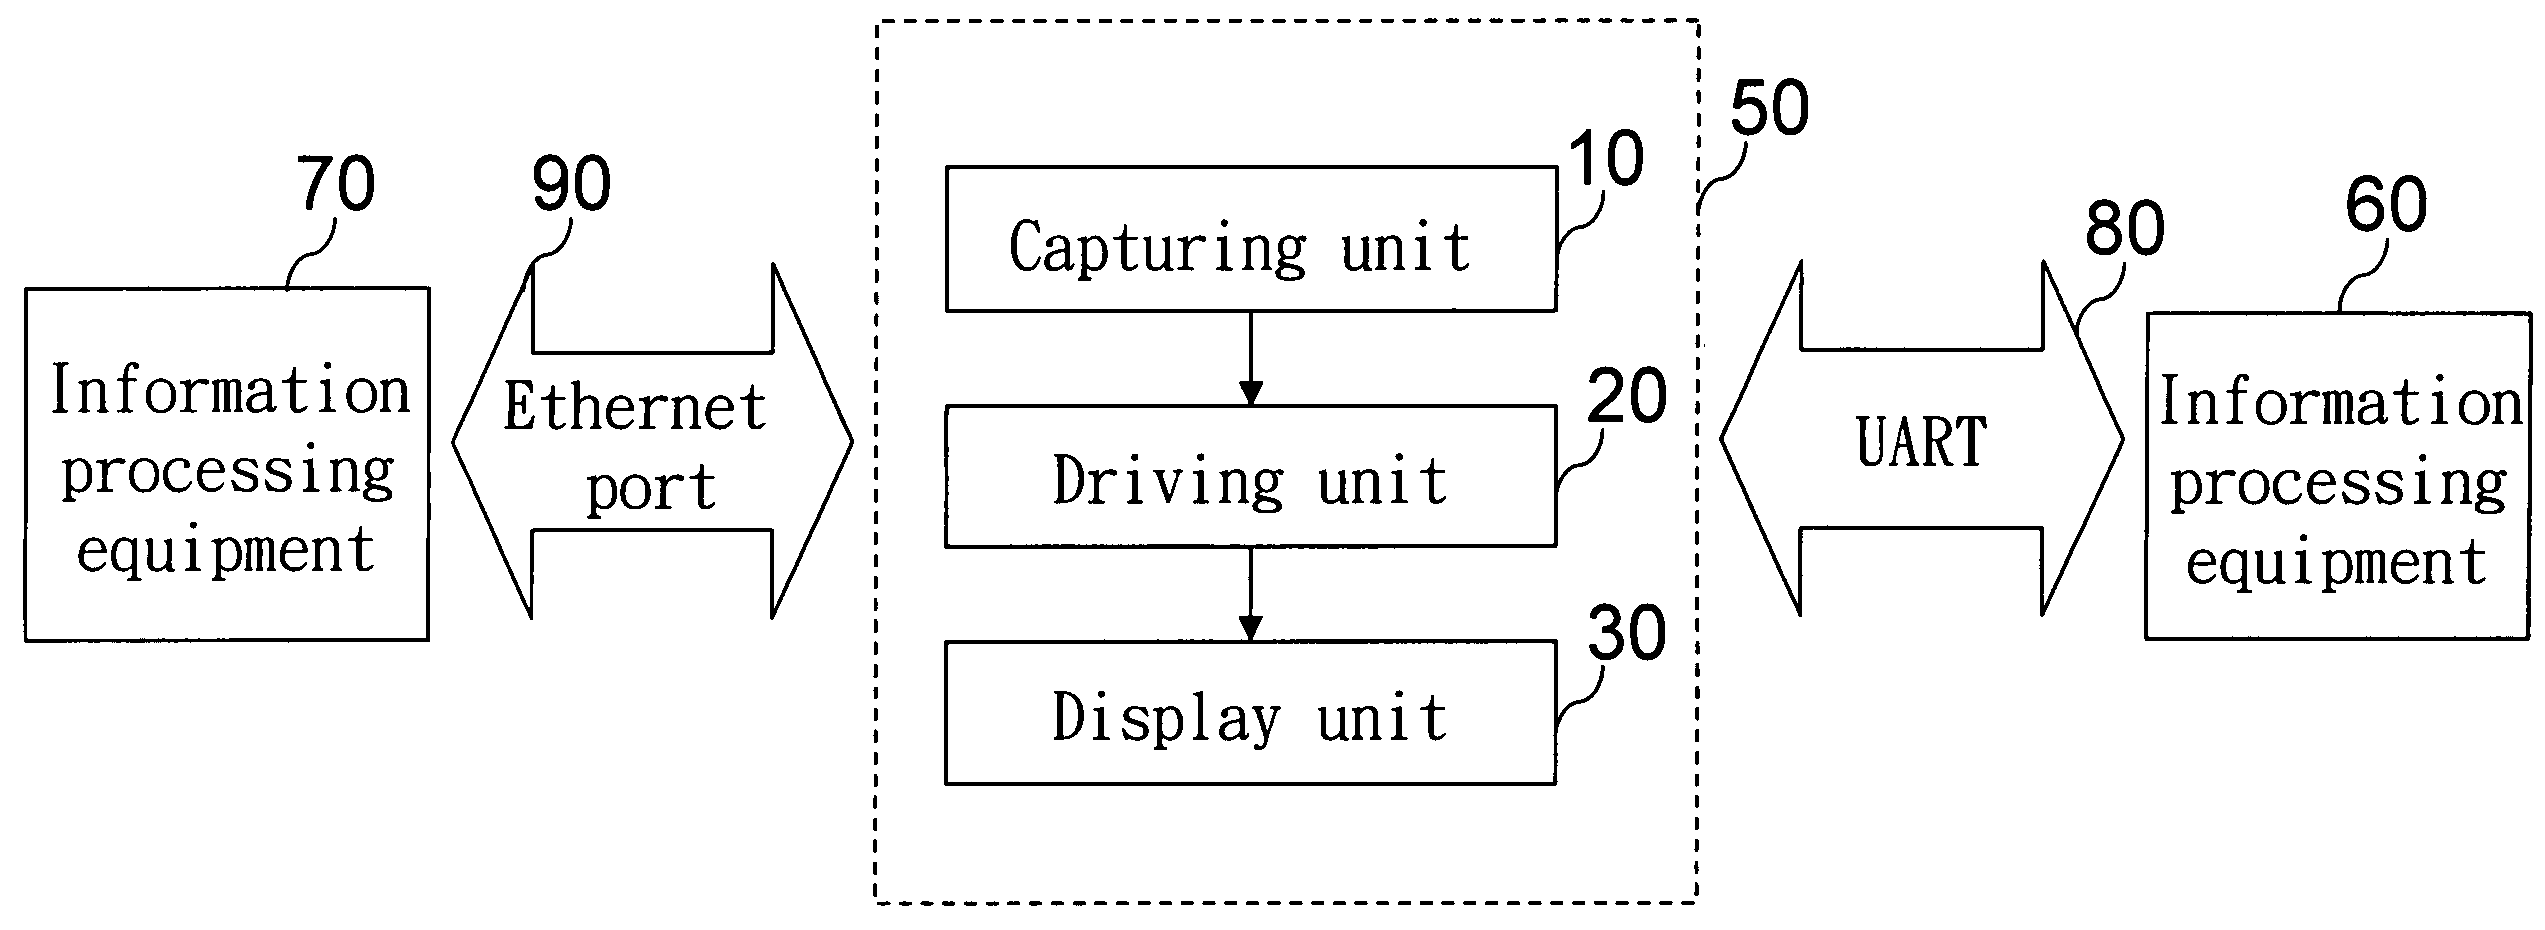 Status display-enabled connector for a universal asynchronous receiver/transmitter